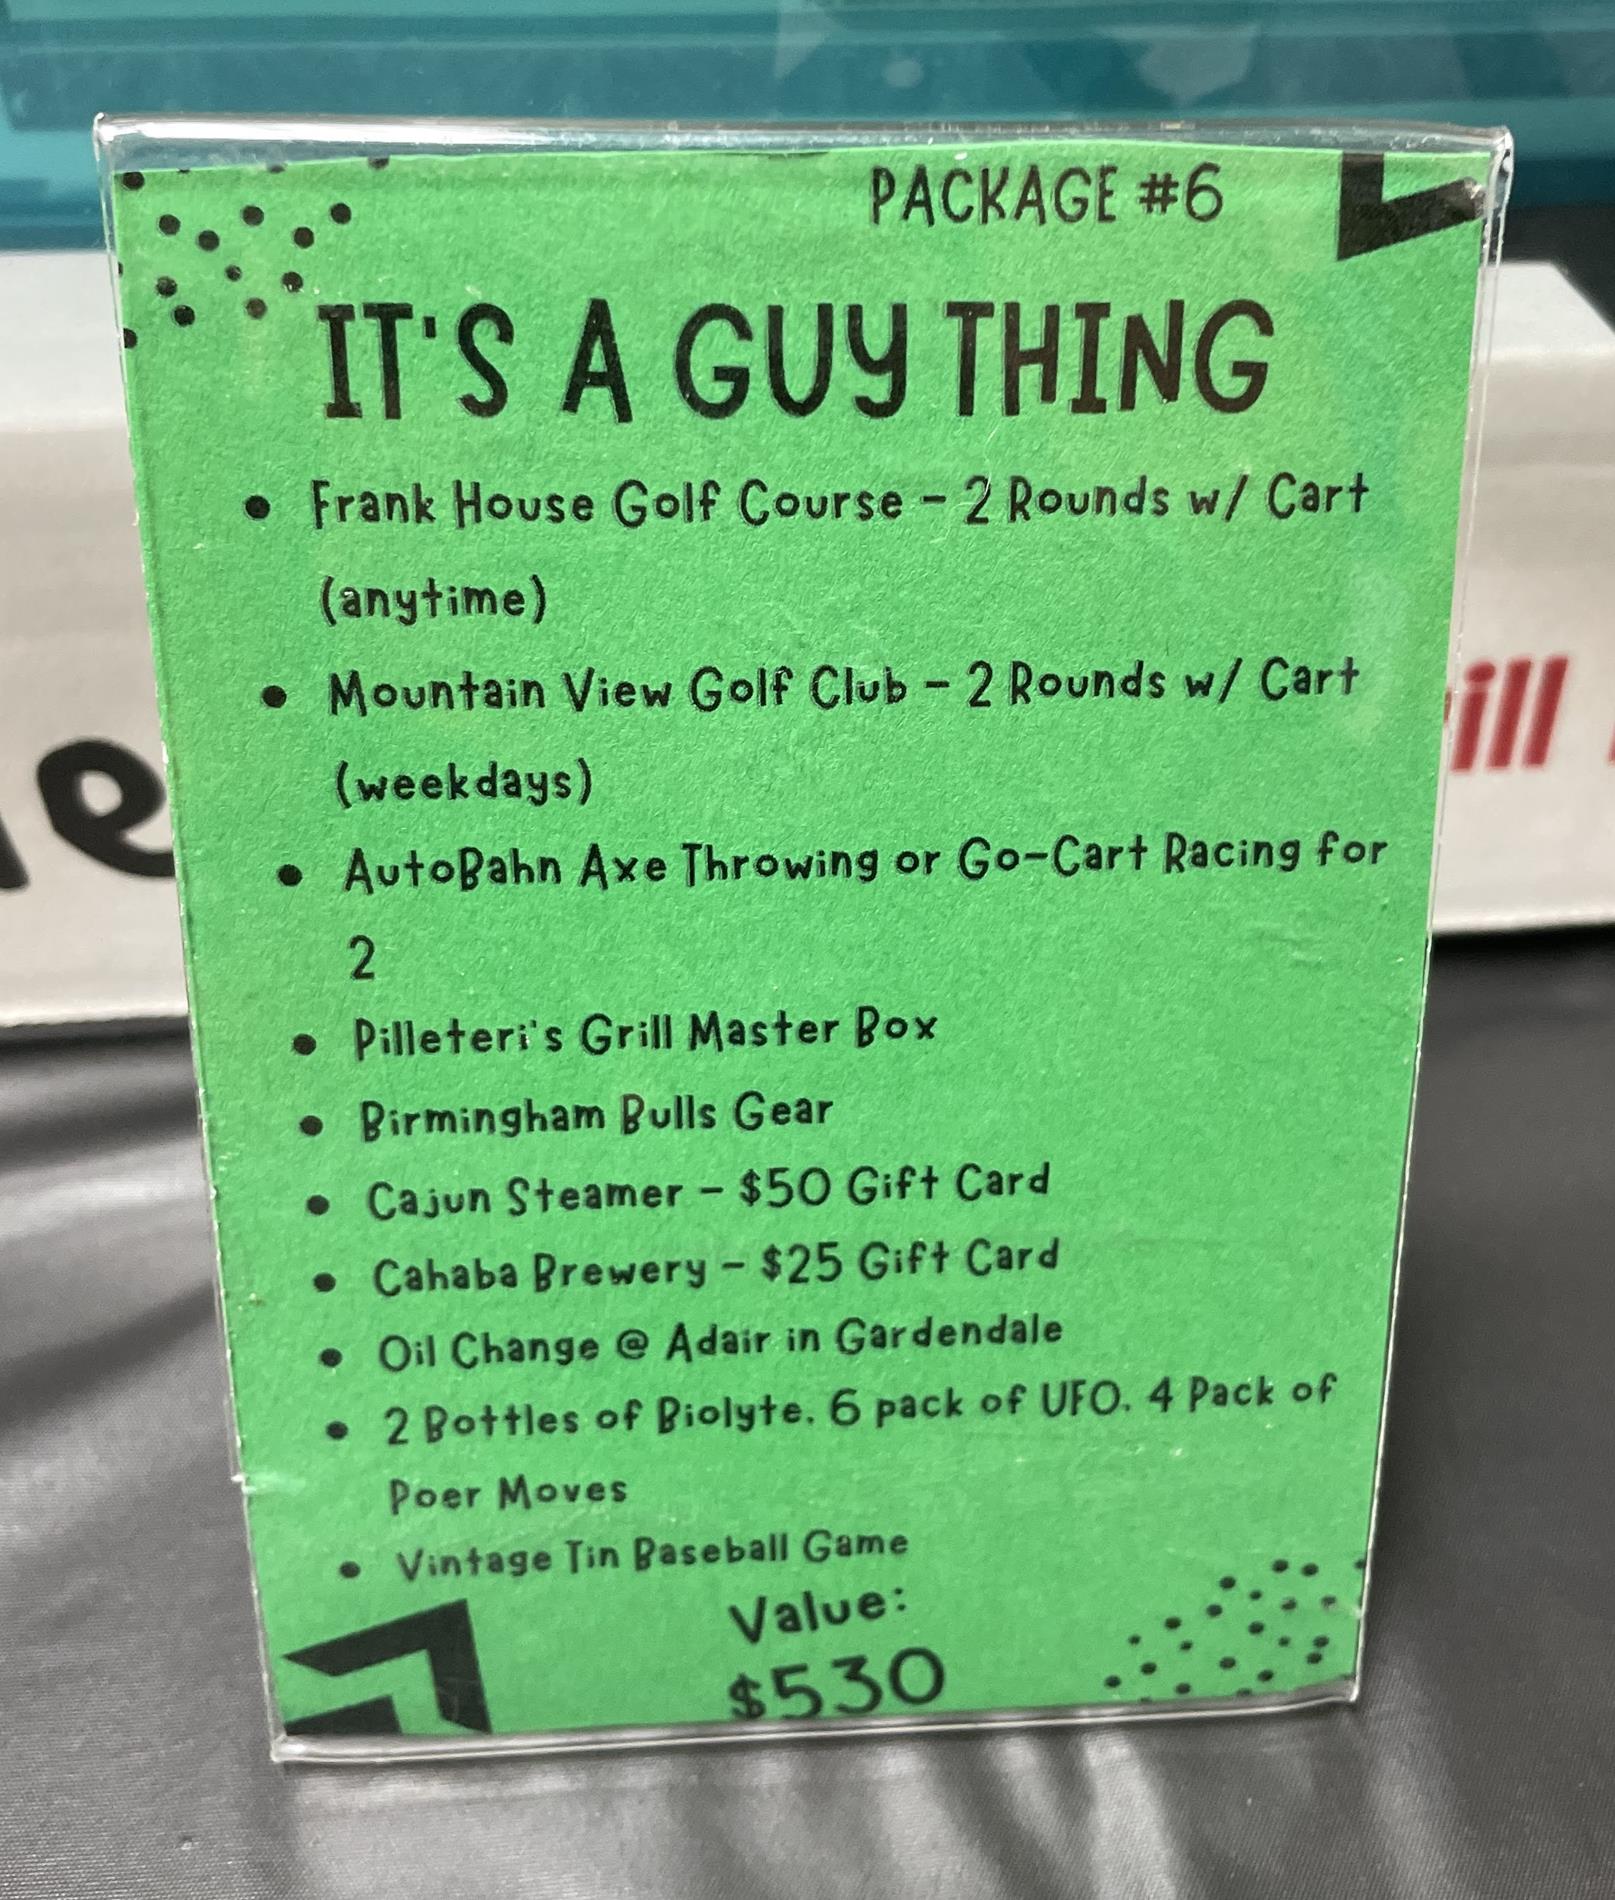 Auction Item #6: It's a Guy Thing